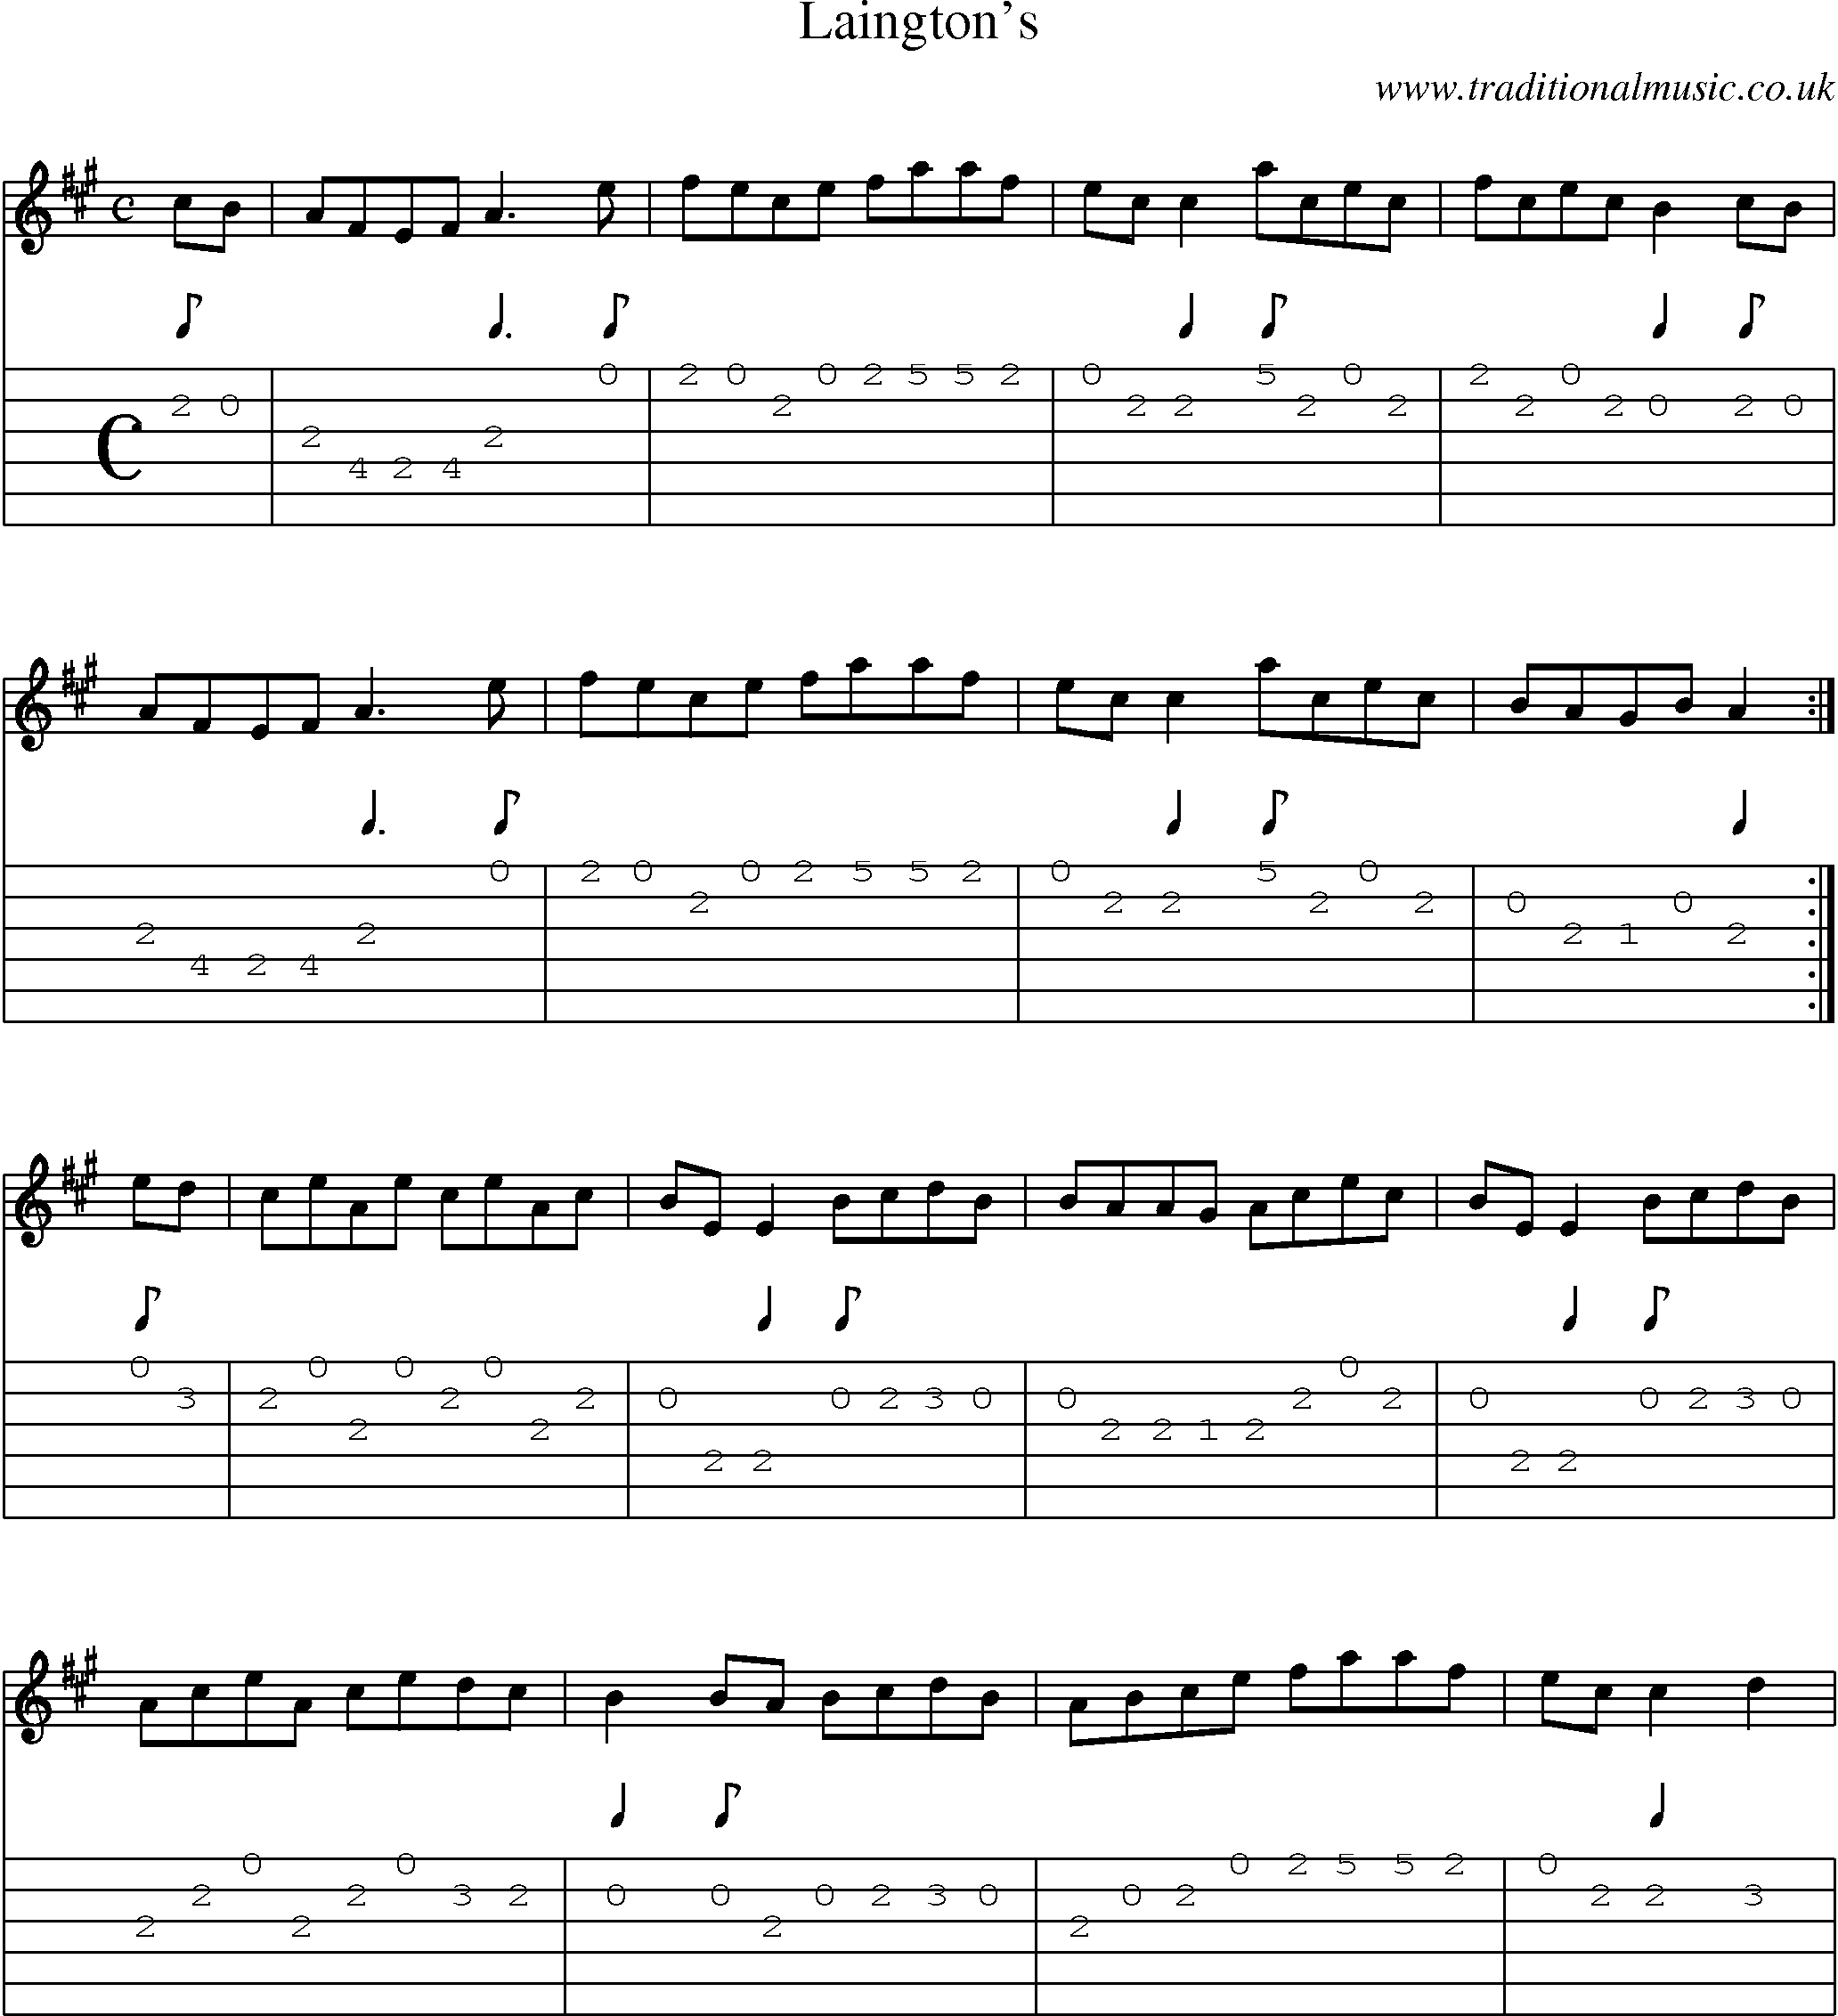 Music Score and Guitar Tabs for Laingtons